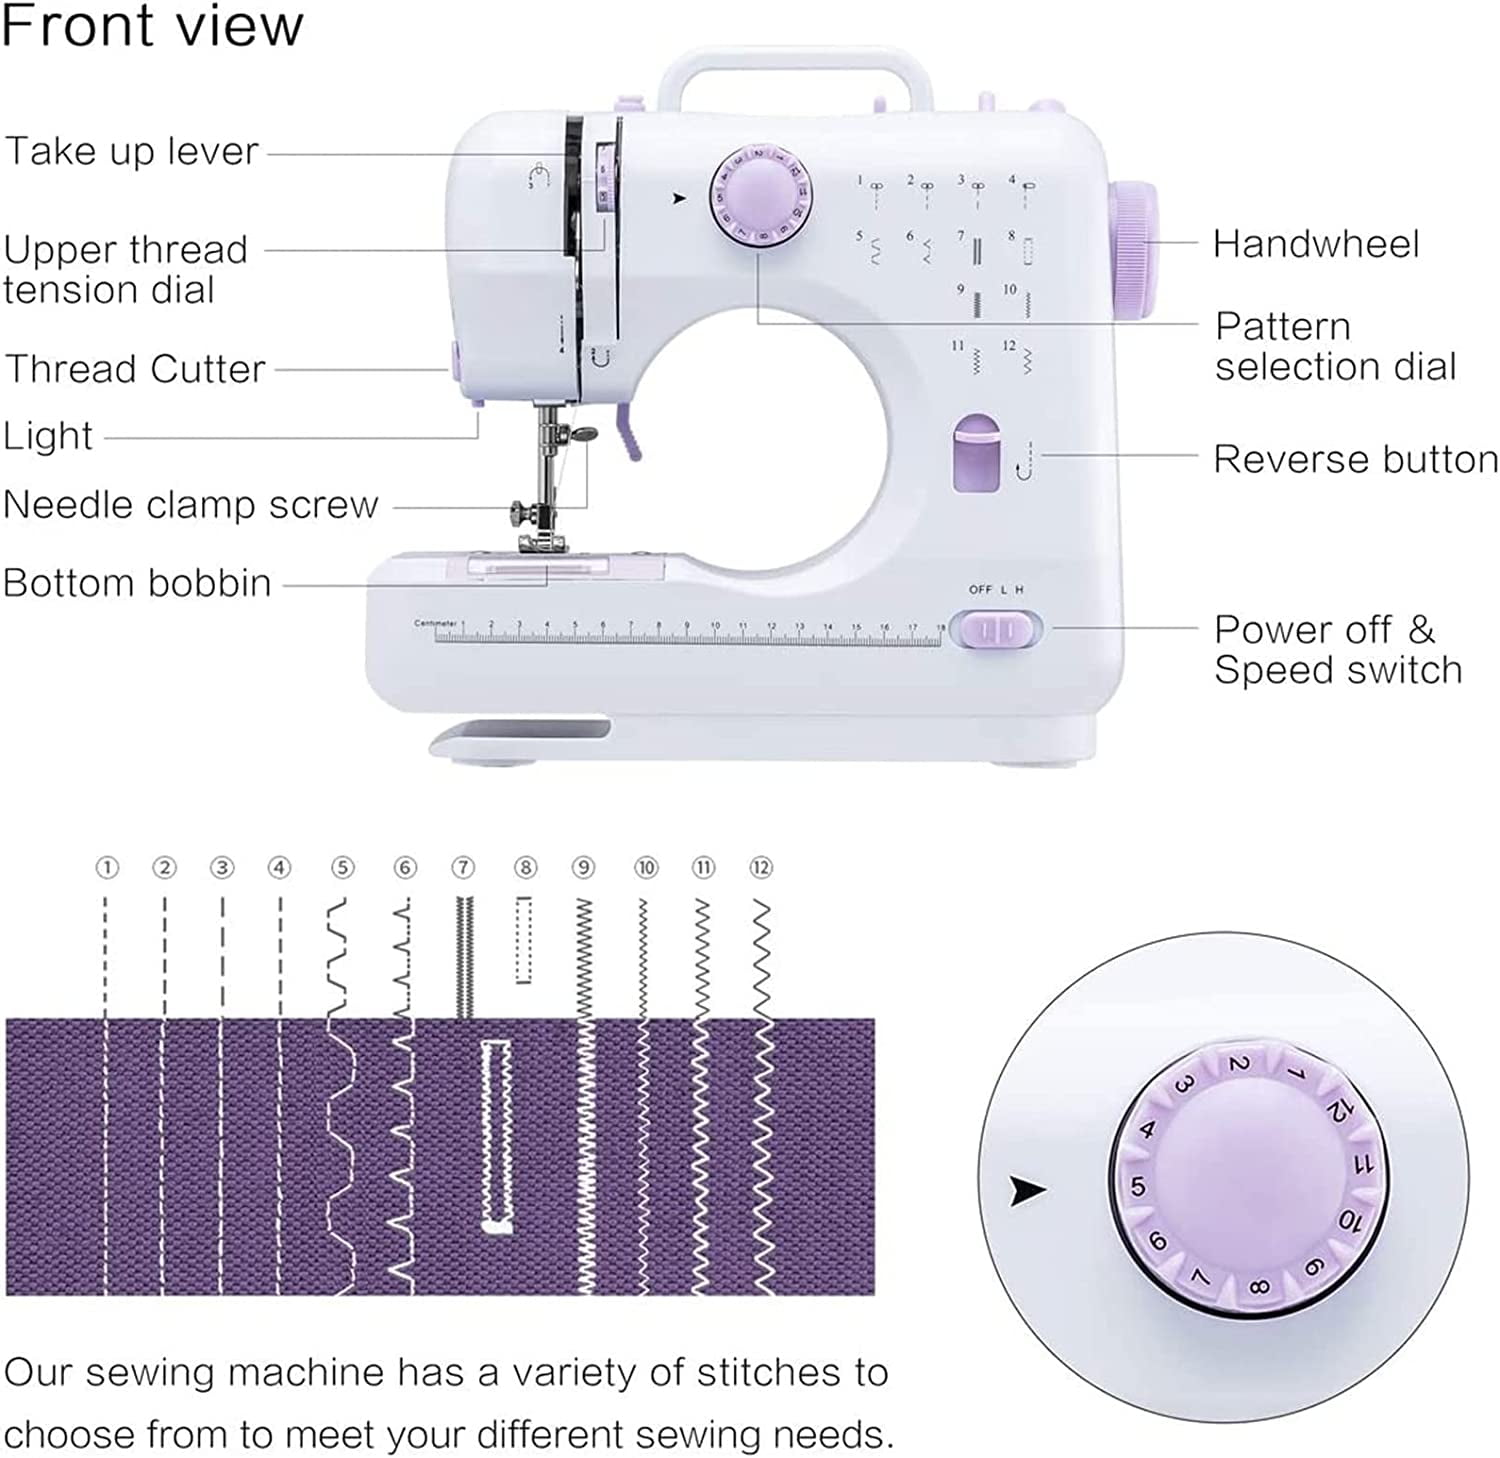 Viferr Portable Sewing Machine, Handheld Mini Electric Sewing Machine with 97pcs Sewing Kit, Extension Table and Foot Pedal for Beginners&Kids, Size